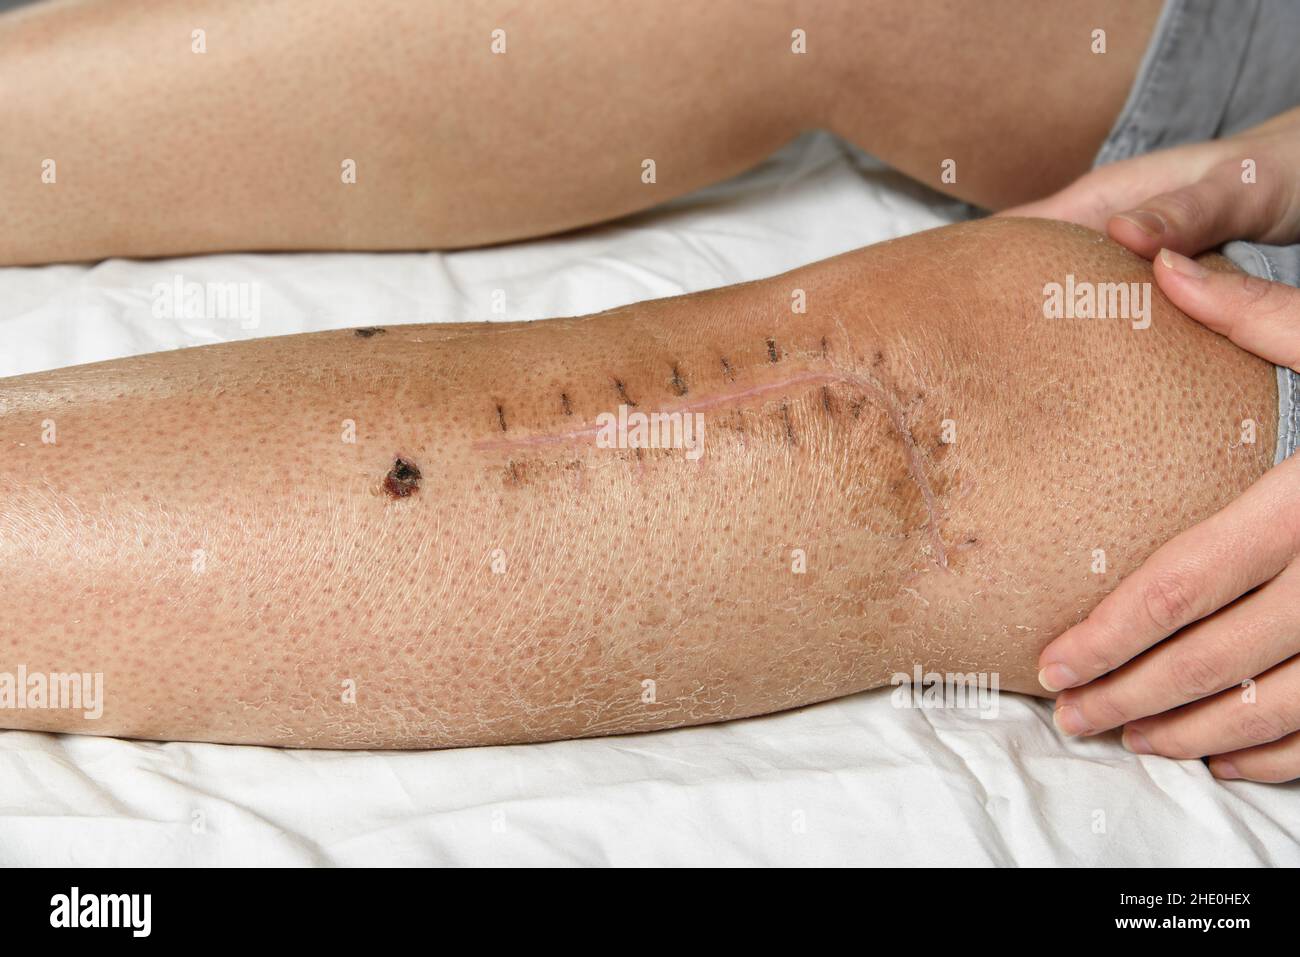 Scar on the Leg, after Injury. the Last Stage of Wound Healing, Scarring  Stock Image - Image of health, help: 192692833